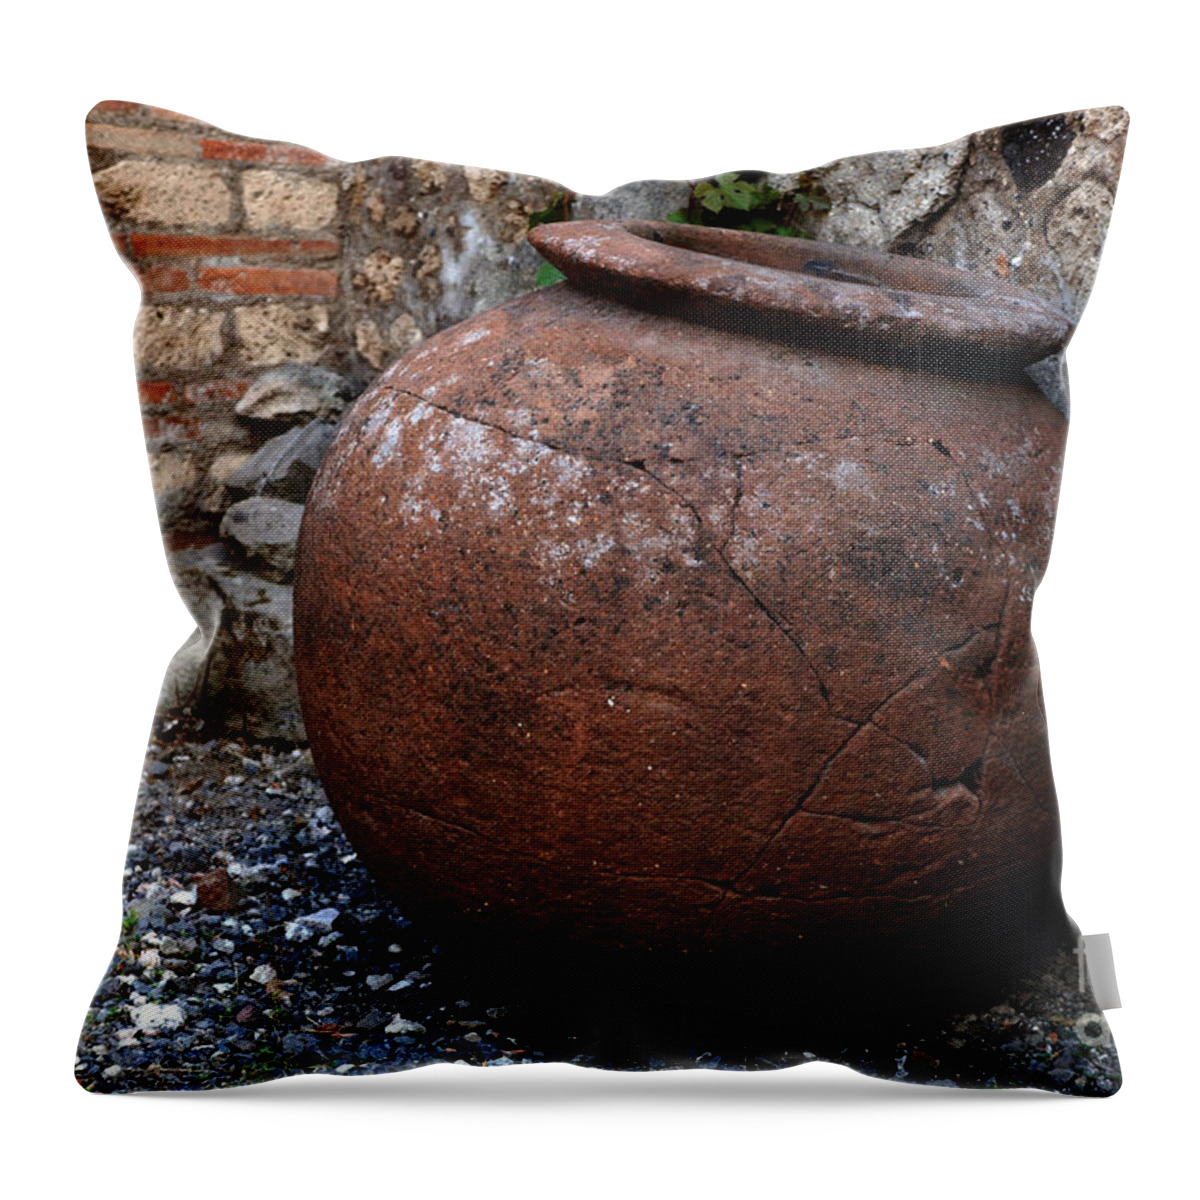 Pompeii Throw Pillow featuring the photograph Ancient Relics Of Pompeii by Bob Christopher